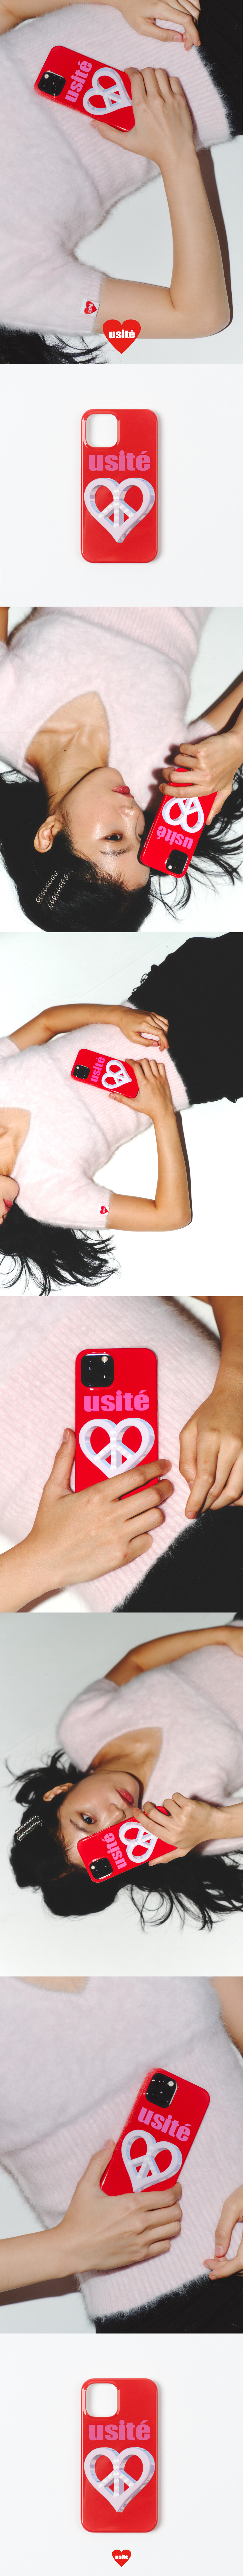 OUR FREEDOM PHONE CASE for iPhone (STRAWBERRY)